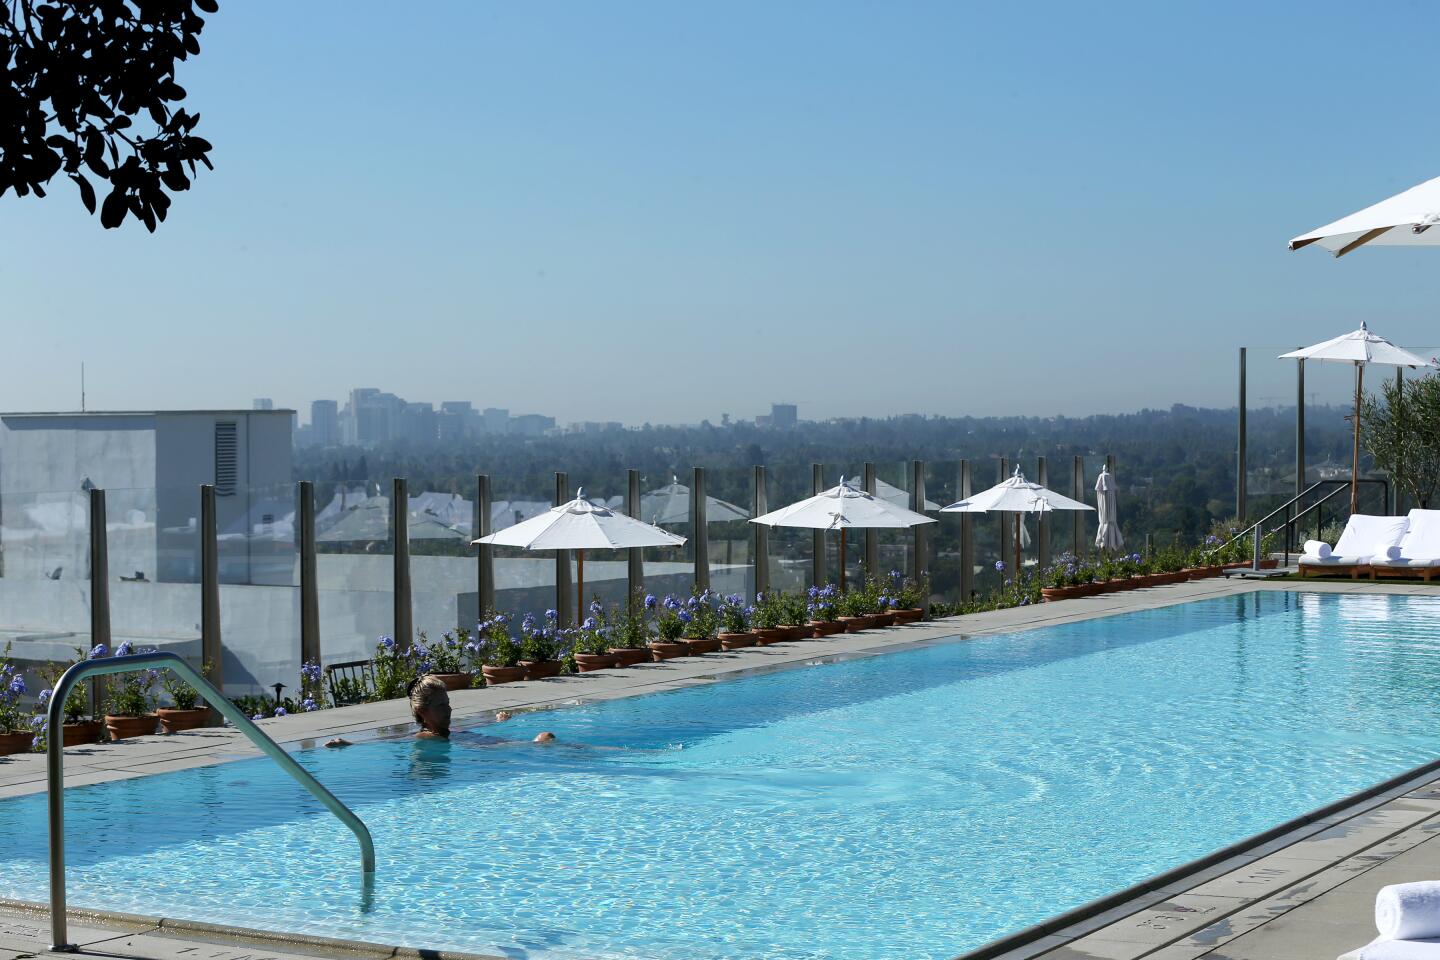 A rooftop pool at the new Edition hotel in West Hollywood, Calif.